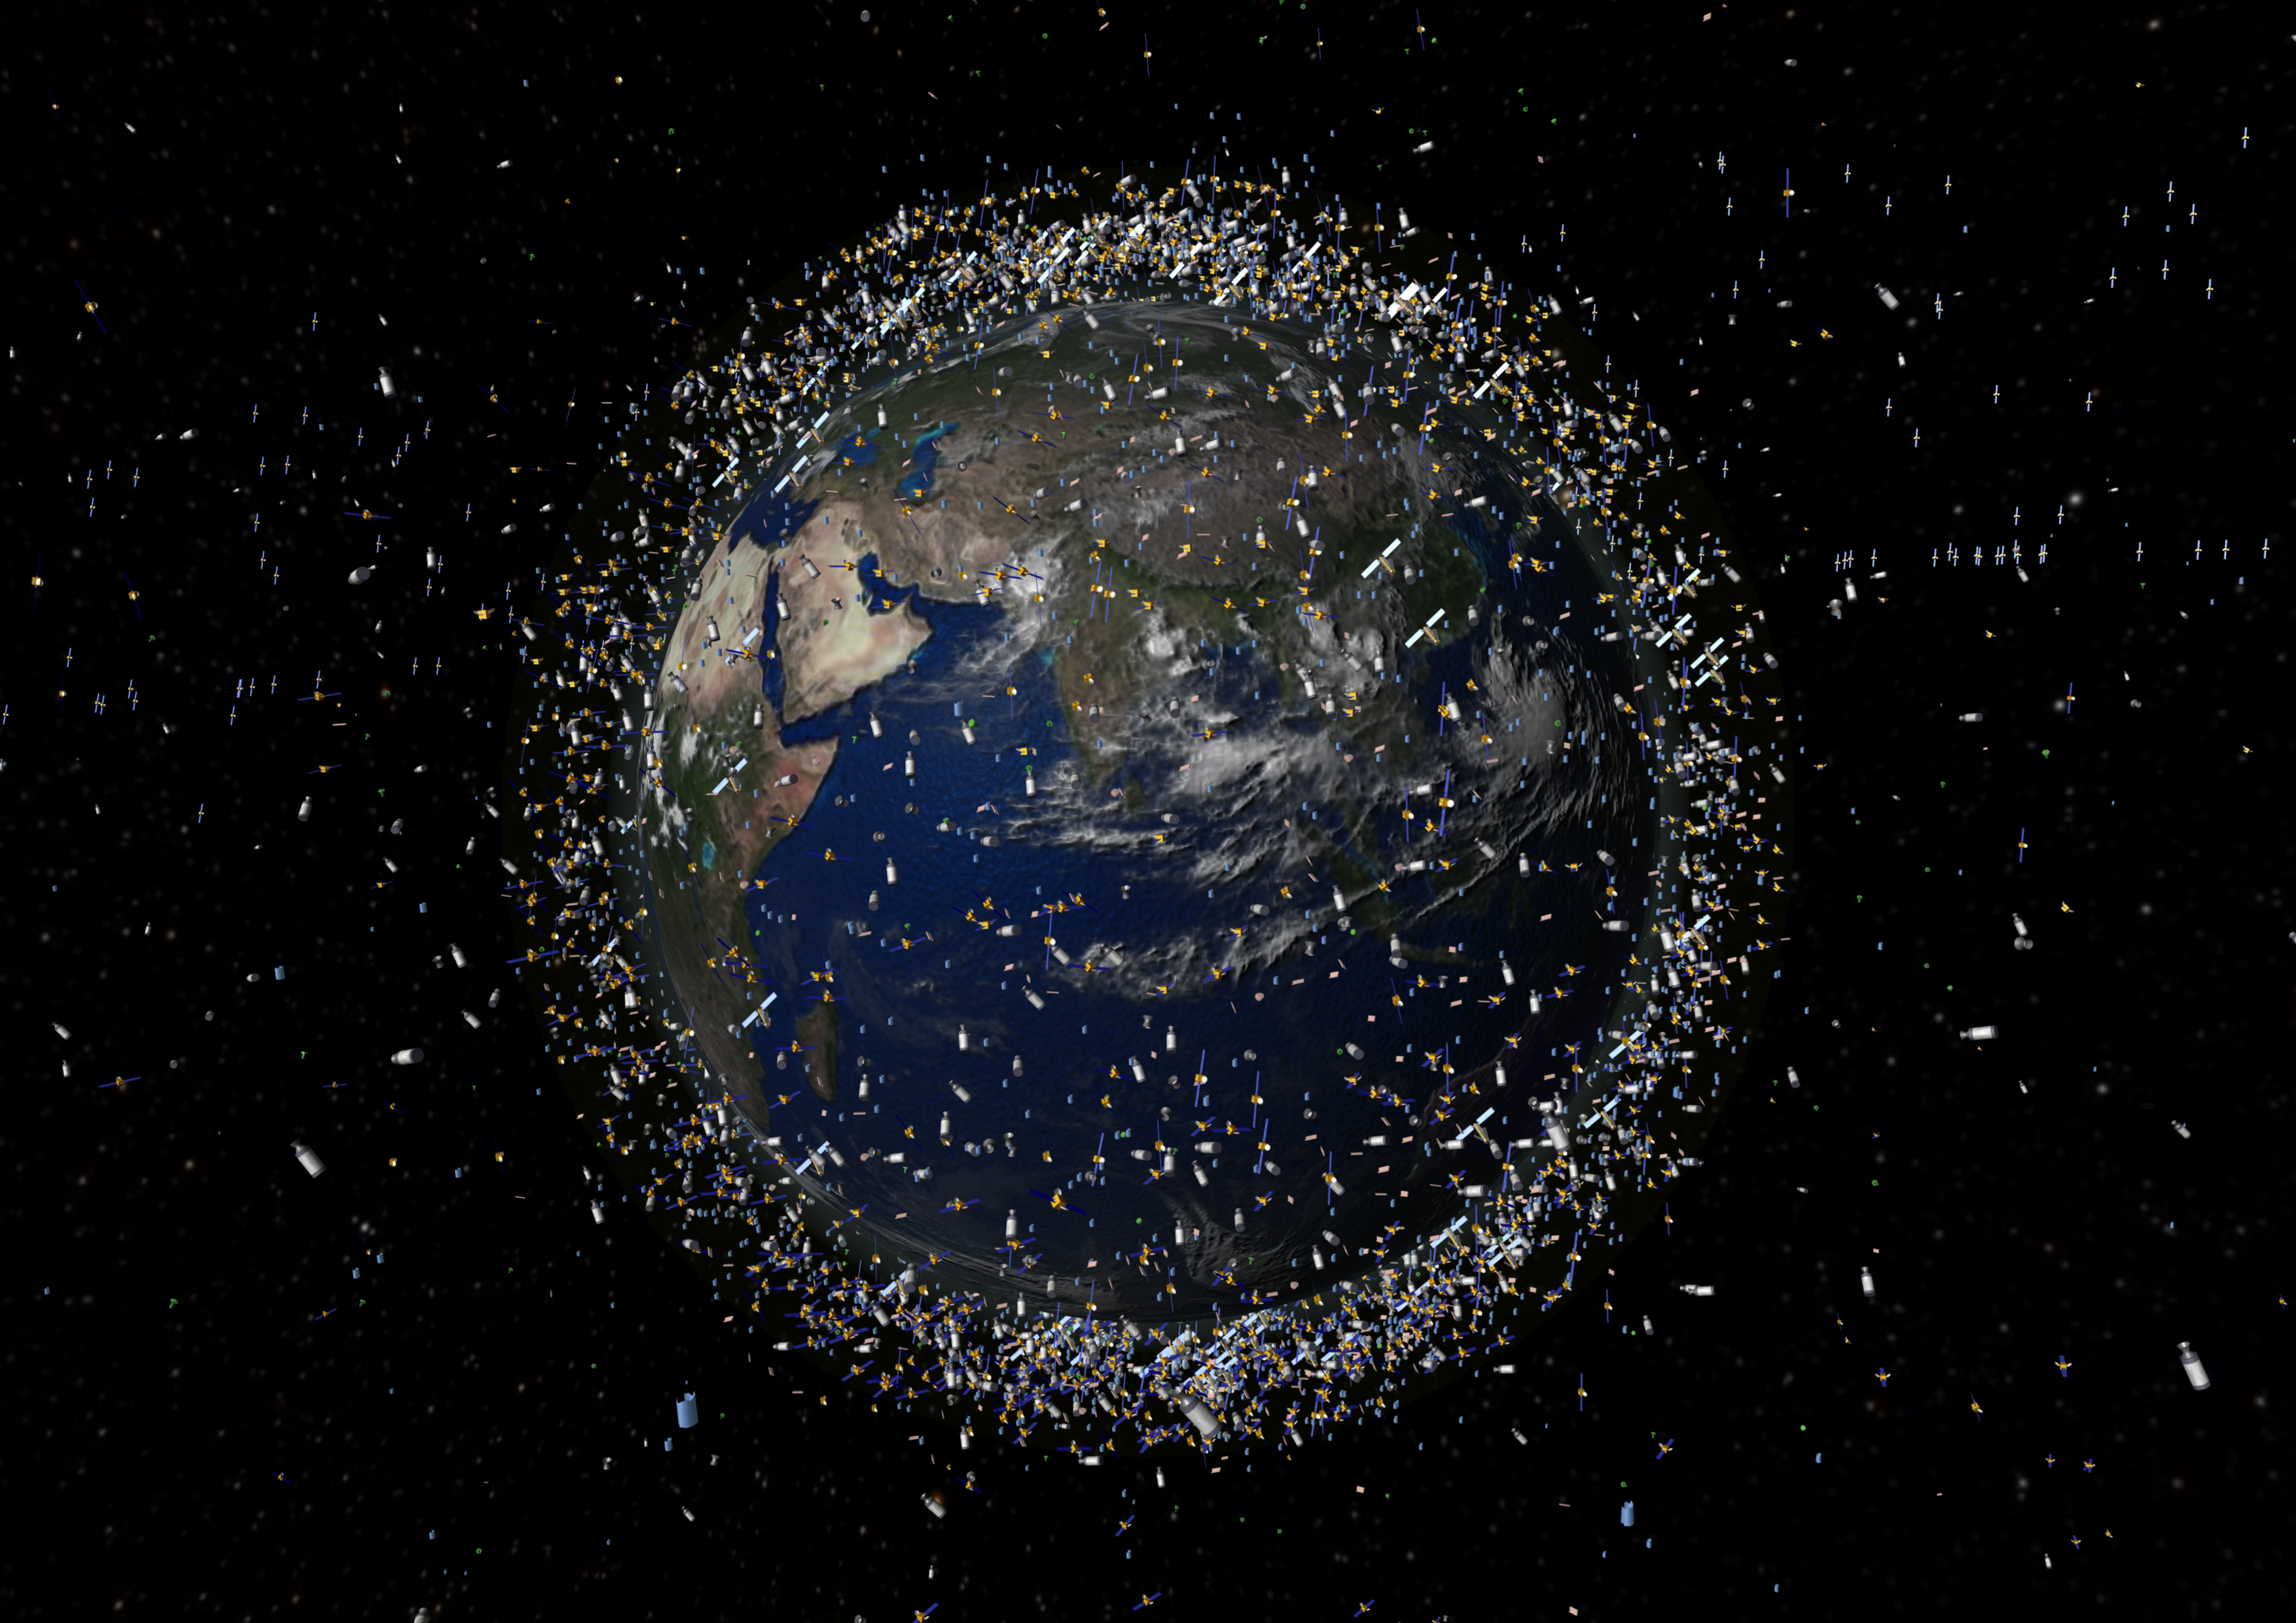 Artist's concept showing thousands of satellites and other debris orbiting Earth. Photo Credit: ESA